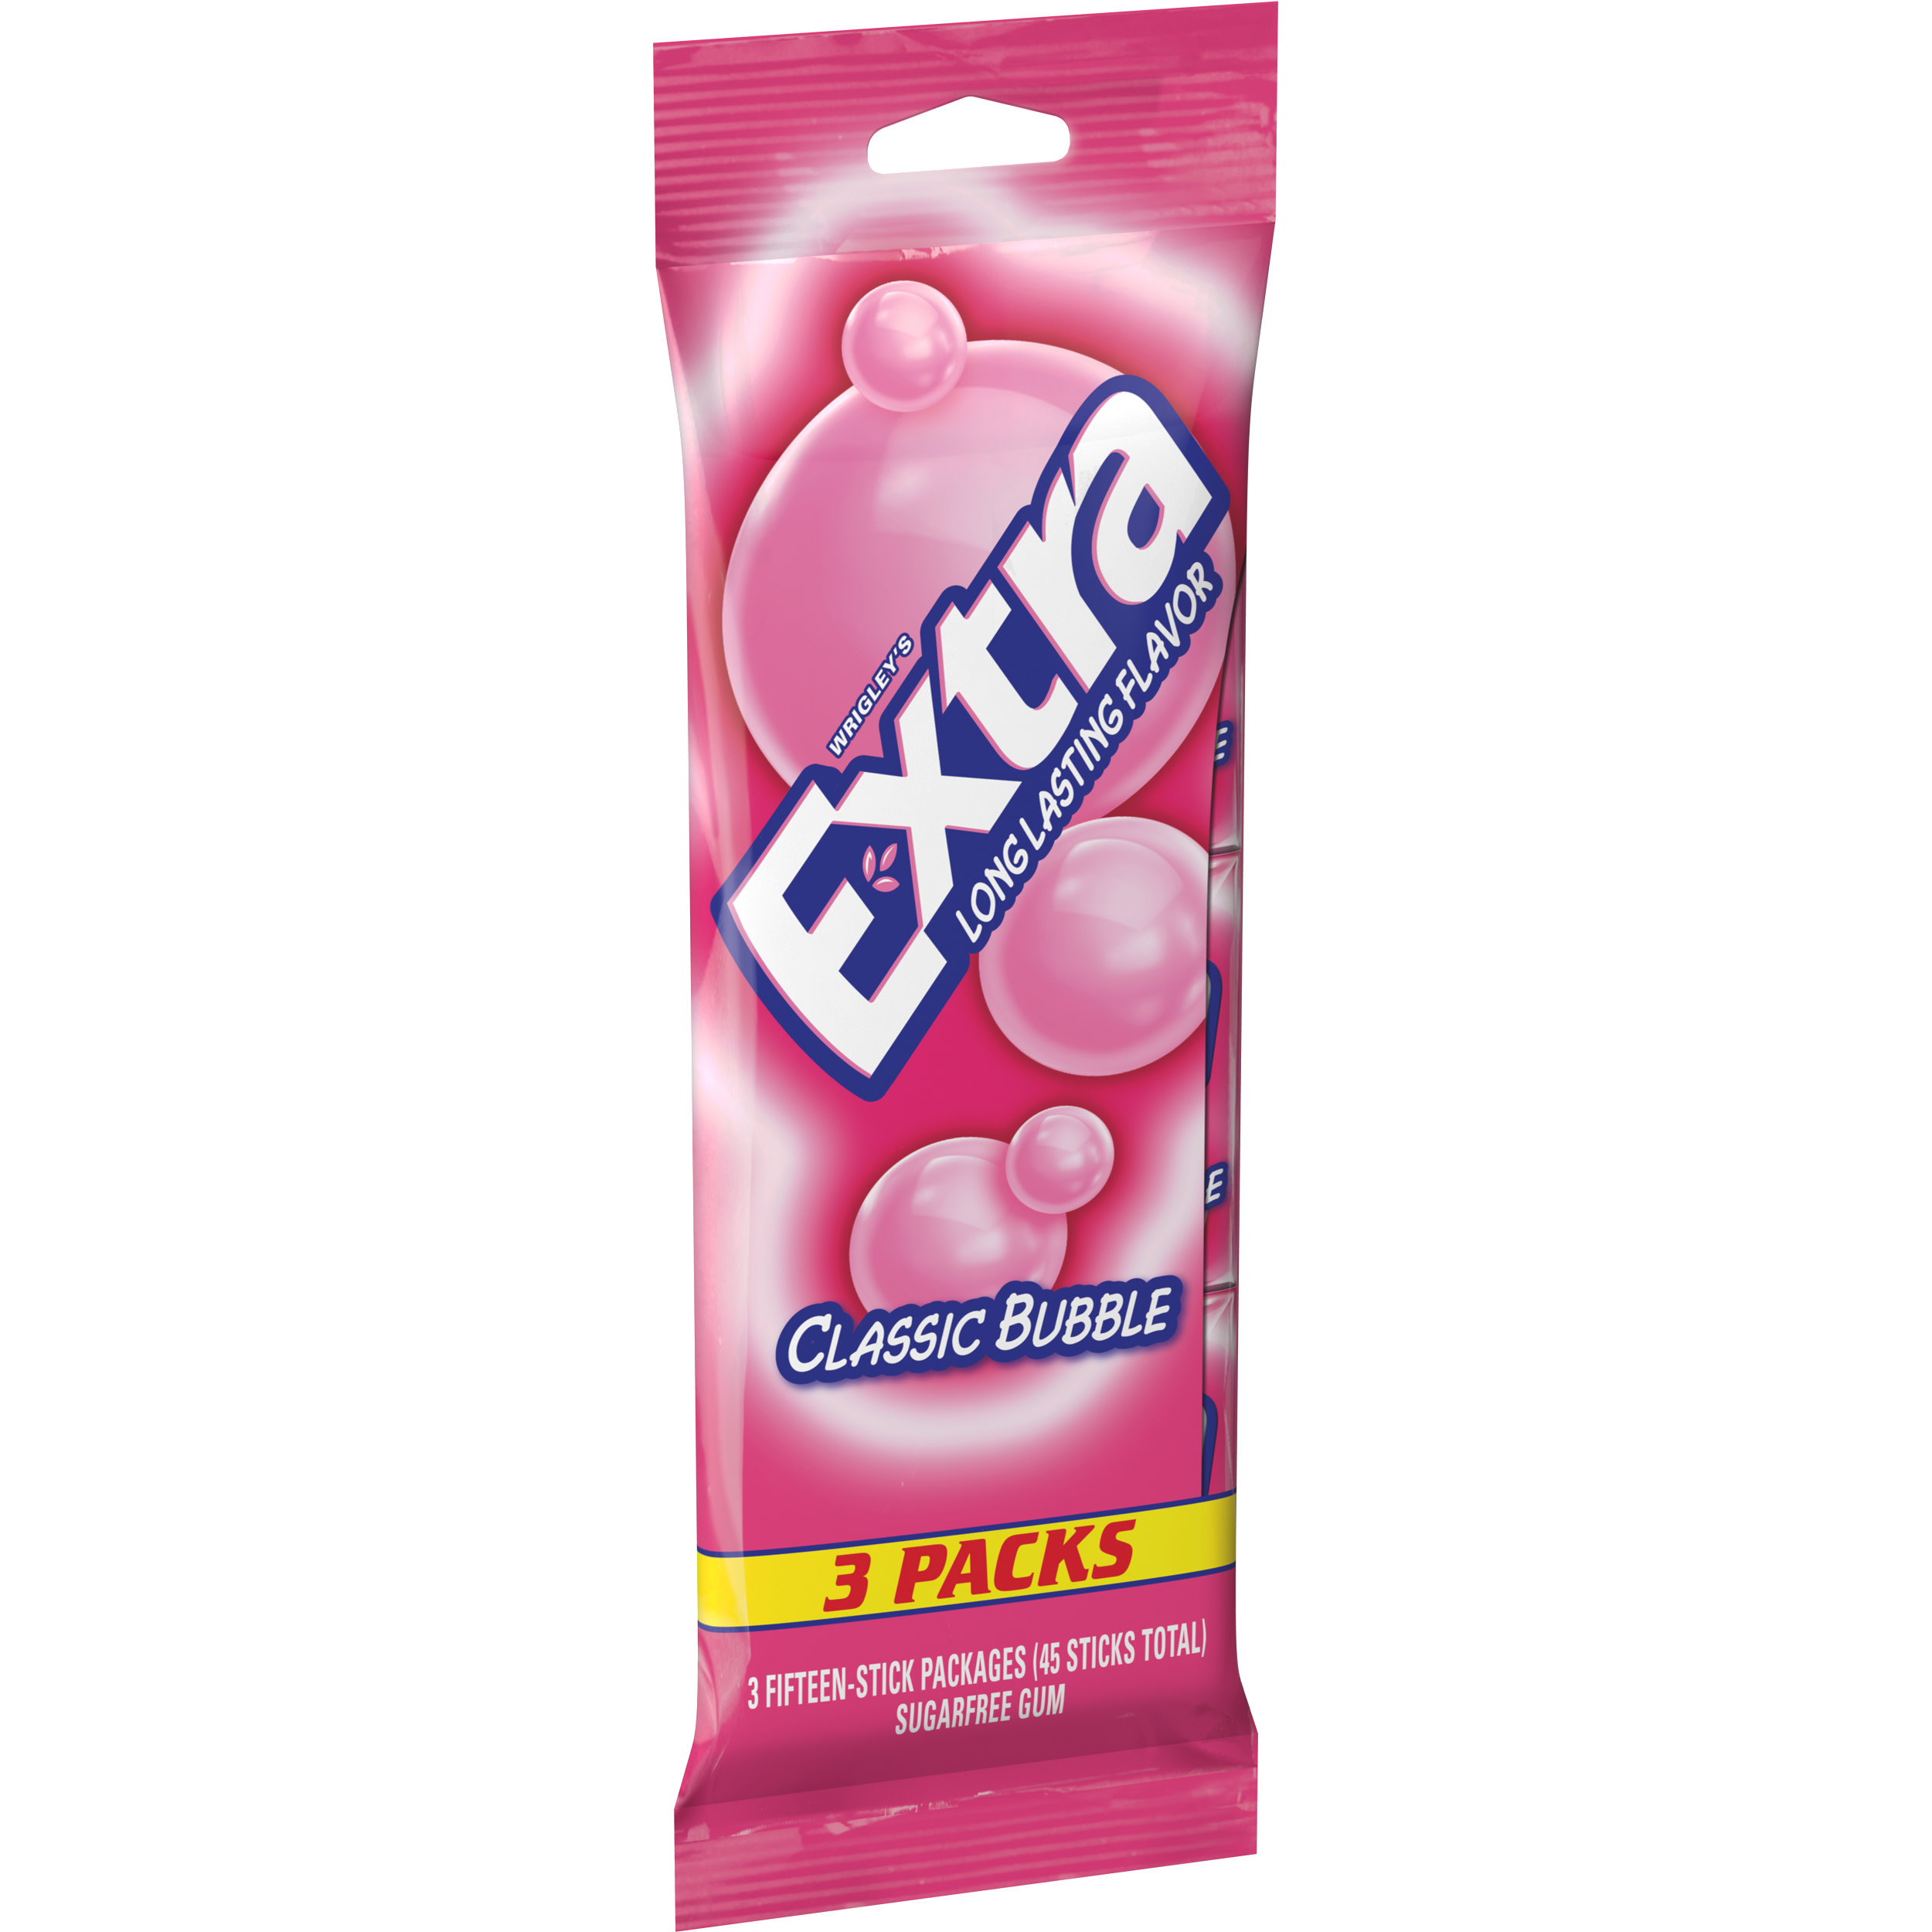 Extra Classic Bubble Gum Sugar Free Back to School Chewing Gum- 3 Pack - image 1 of 15